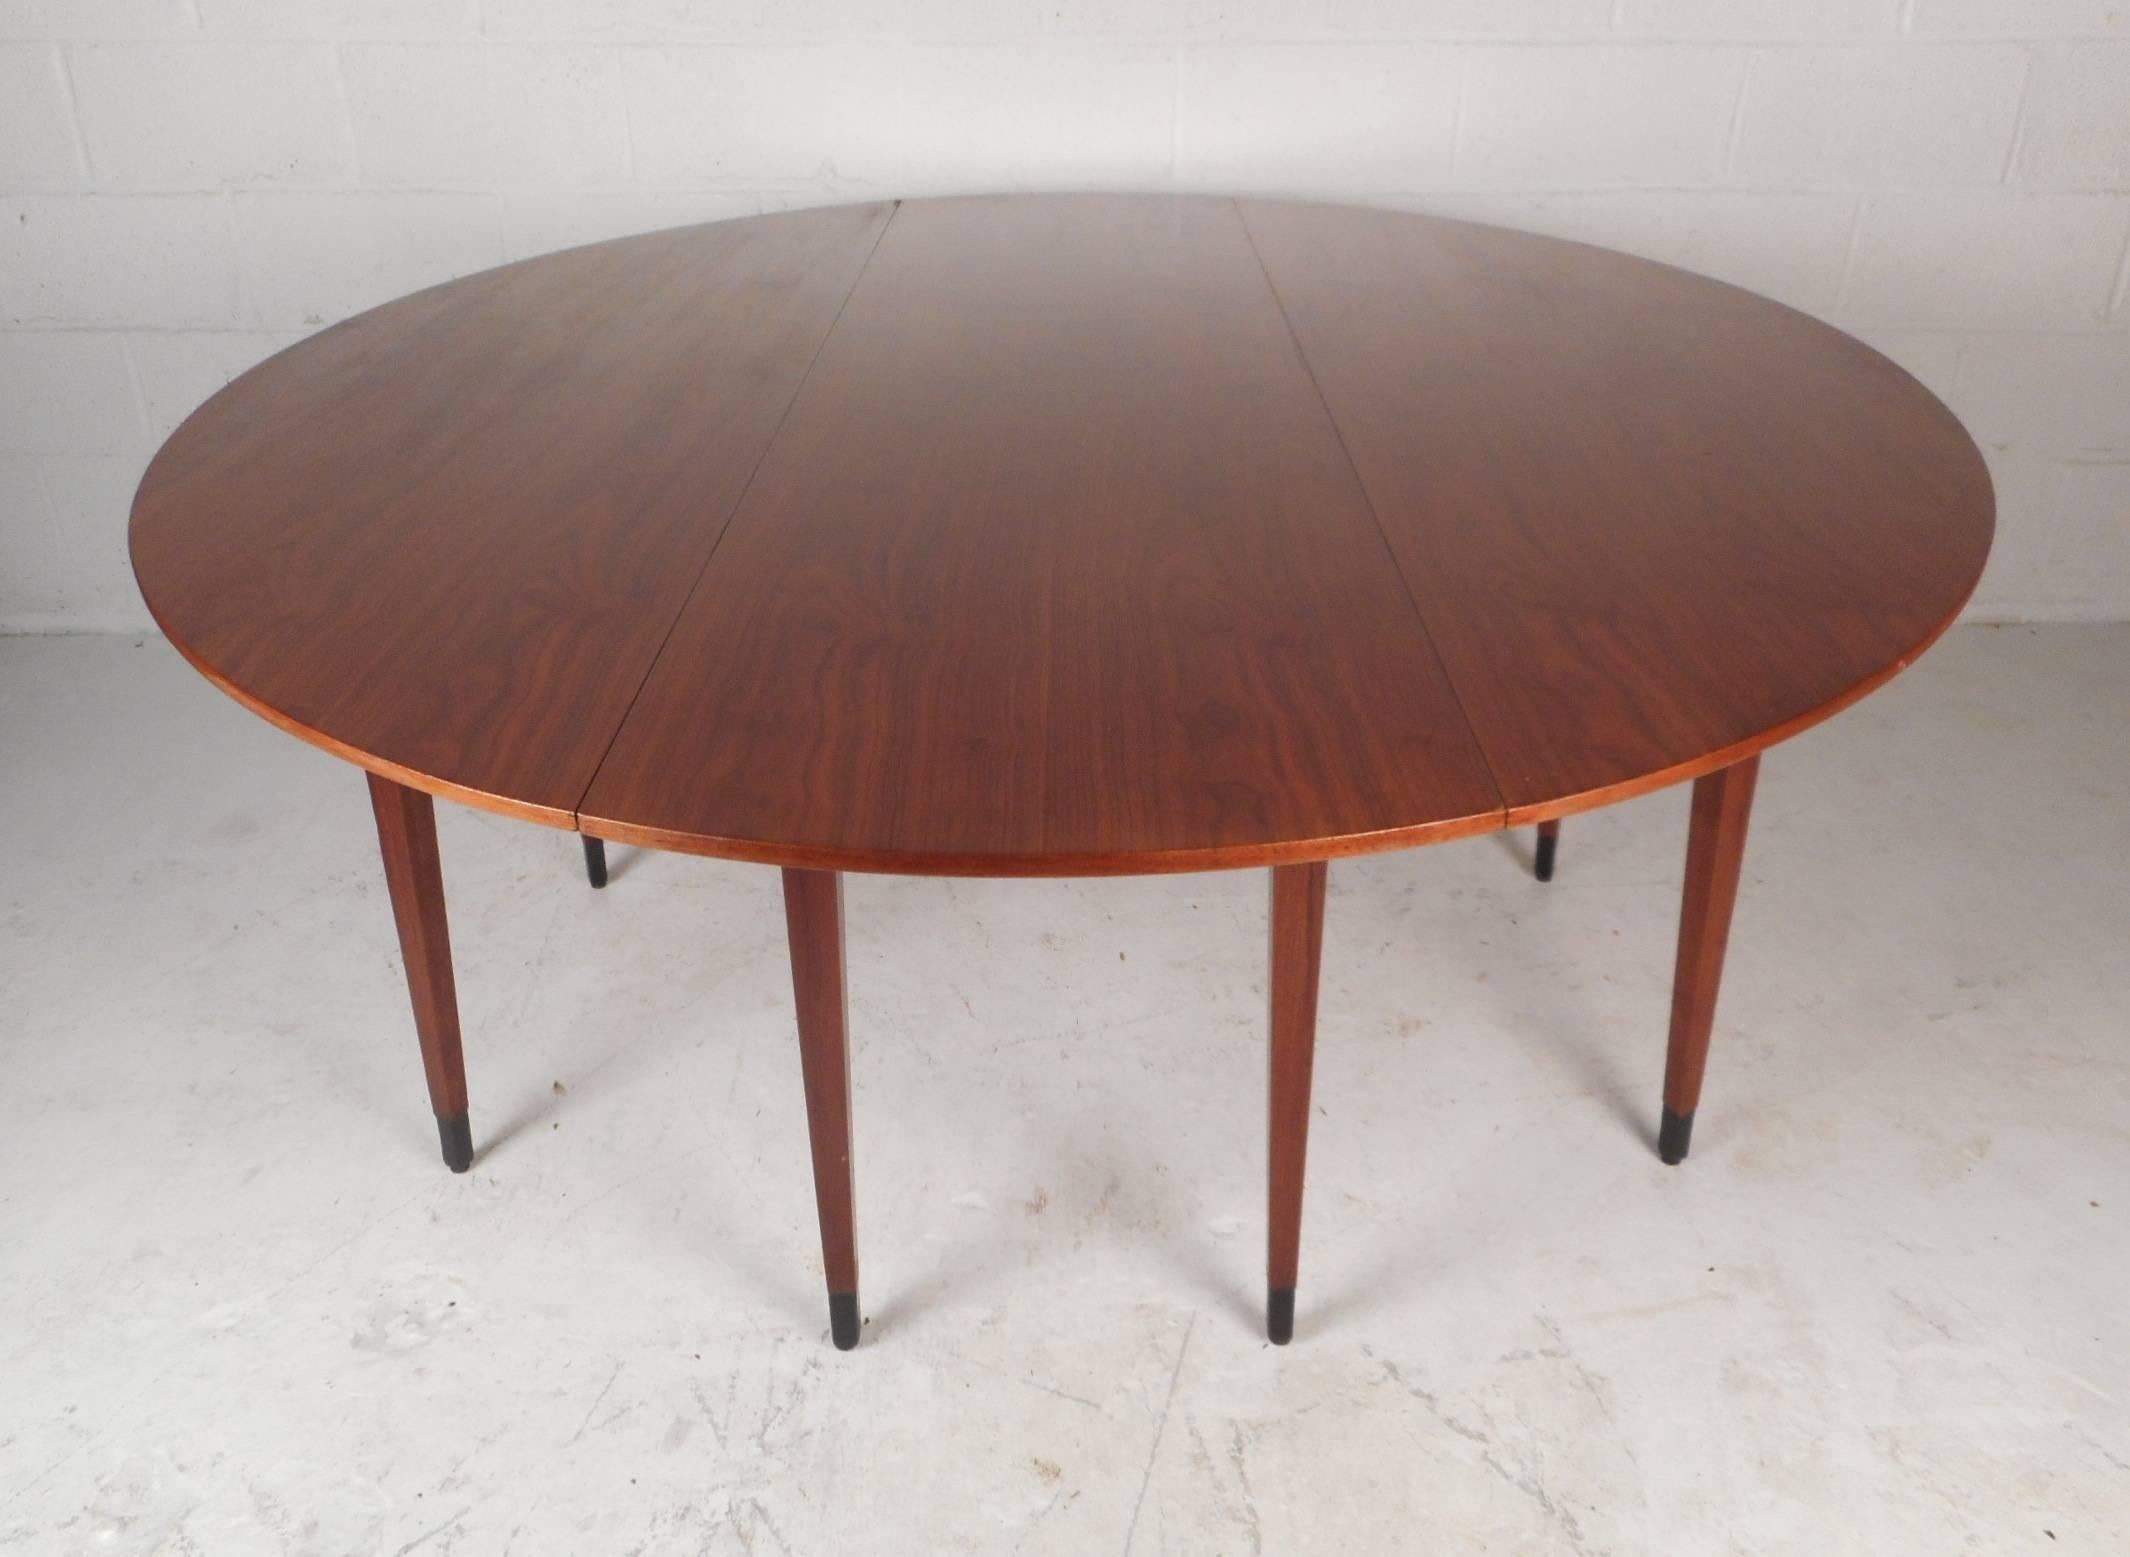 1950s formica drop leaf table